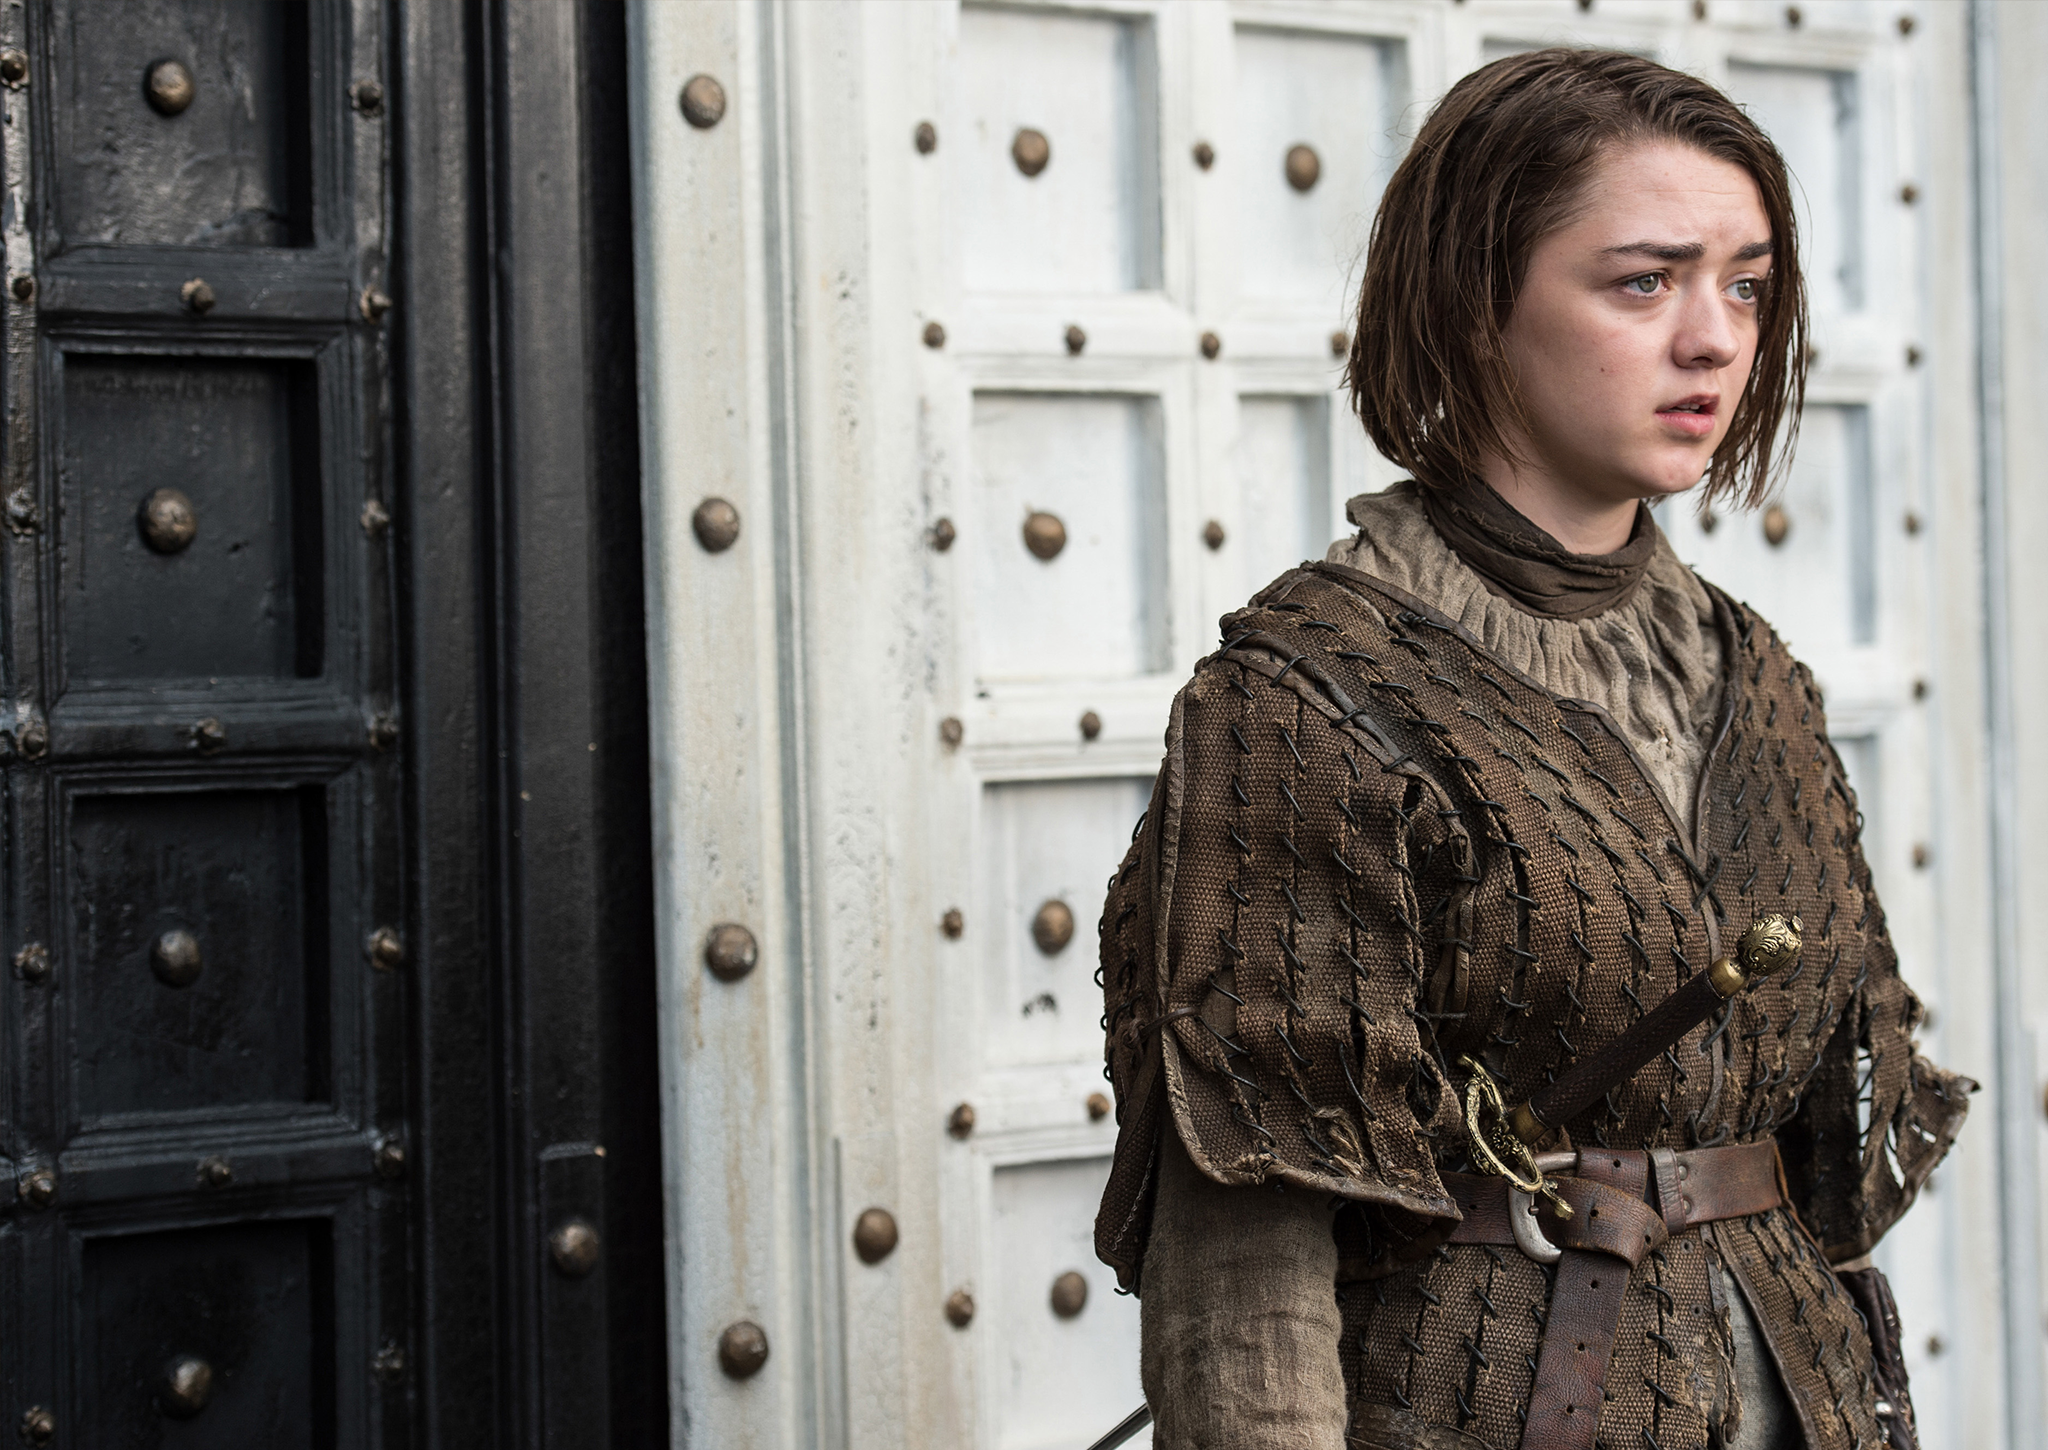 Arya is a trainee of the Faceless Men